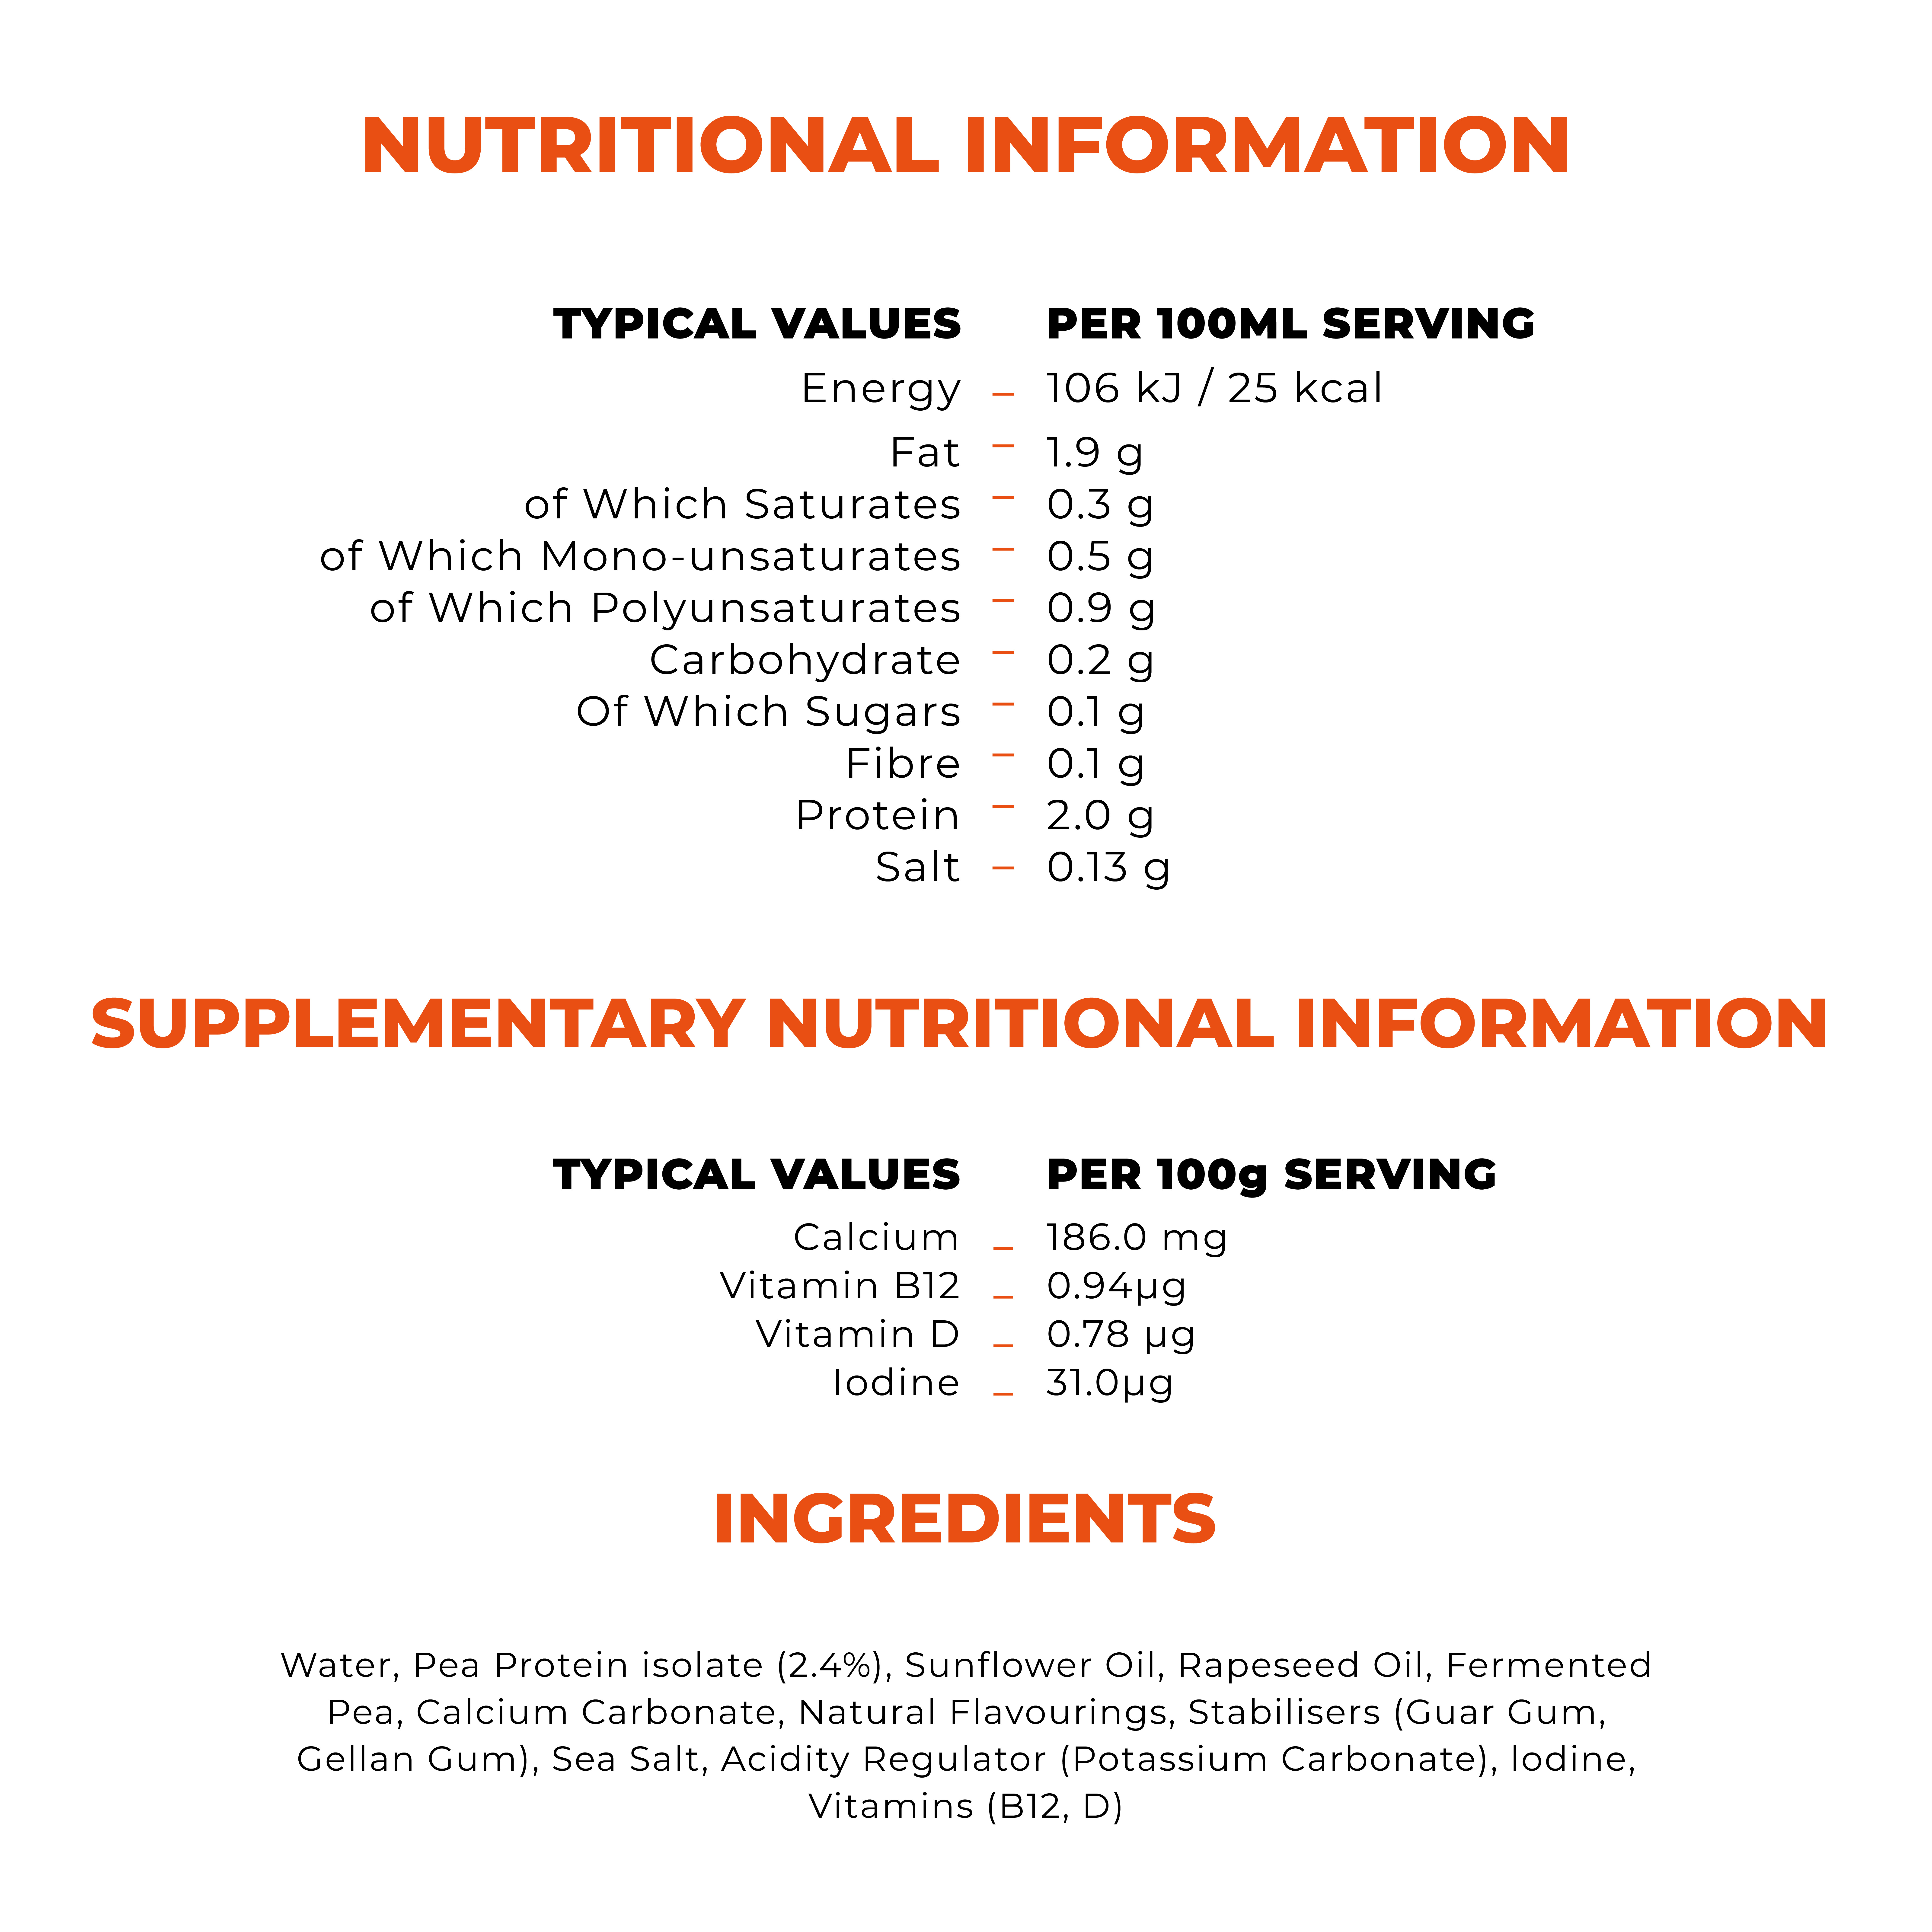  TYPICAL VALUES PER 100ML SERVING Energy 113 kJ / 27 kcal Fat 1.9 g of Which Saturates 0.3 g of Which Mono-unsaturates 0.5 g of Which Polyunsaturates 0.8 g Carbohydrate 0.1 g of Which Sugars 0.1 g Fibre 0.1 g Protein 2.4 g Salt 0.2 g 
                                  SUPPLEMENTARY NUTRITIONAL INFORMATION 
                                  TYPICAL VALUES PER 100g SERVING Calcium 186.0 mg Vitamin B12 0.94 pg Vitamin D 0.78 pg Iodine 31.0 pg 

                                  Water, Pea Protein Isolate (3%), Sunflower Oil, Calcium Carbonate, Natural Flavourings, Stabilisers (Guar Gum, Gellan Gum), Acidity Regulator (Potassium Carbonate), Sea Salt, Iodine, Vitamins (B12, D) 
                                  